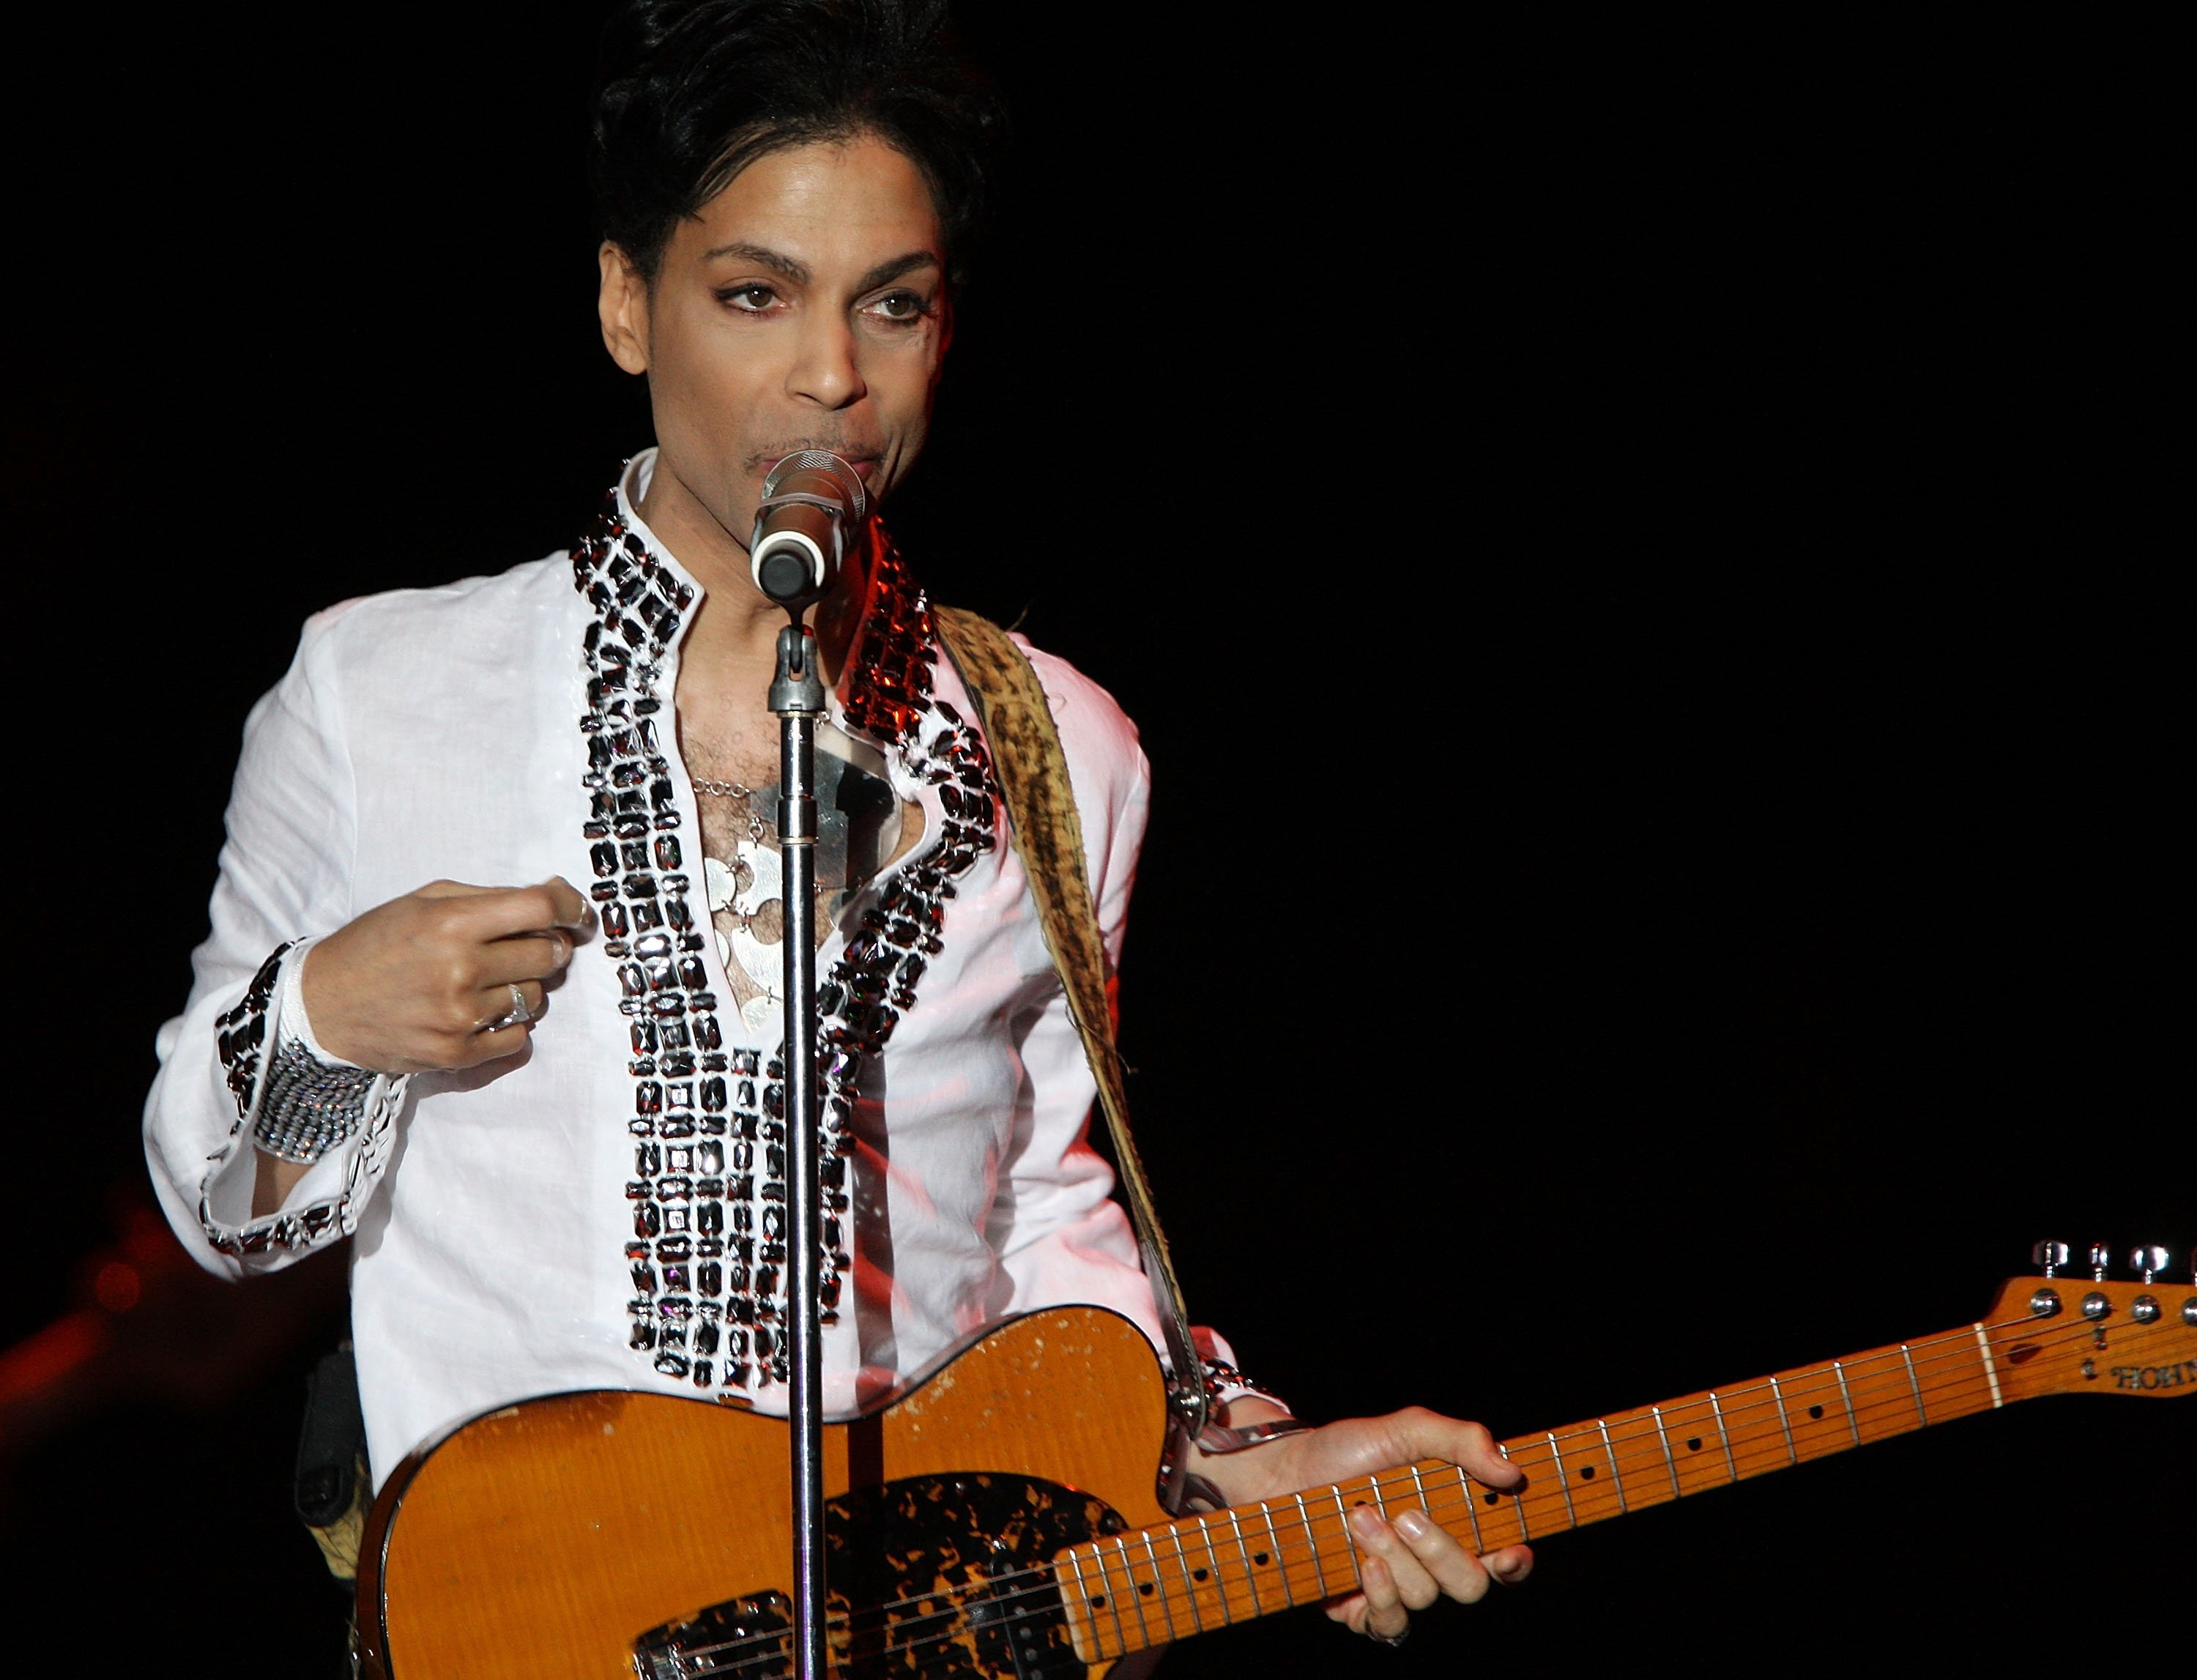 Prince with a guitar